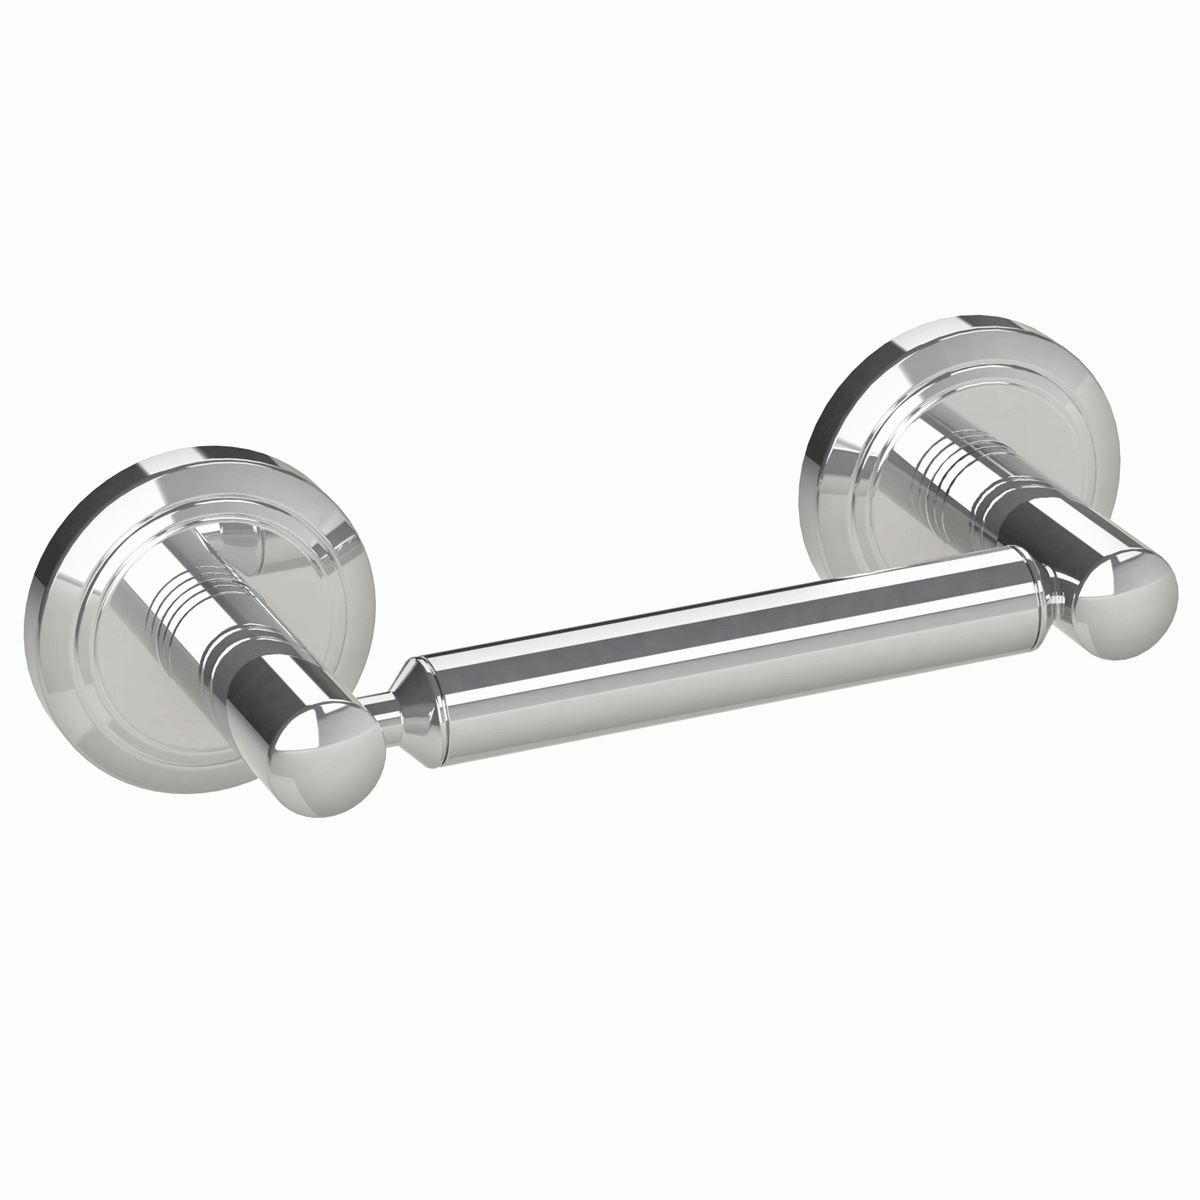 Miller Oslo Double Post Toilet Roll Holder Chrome Questions & Answers